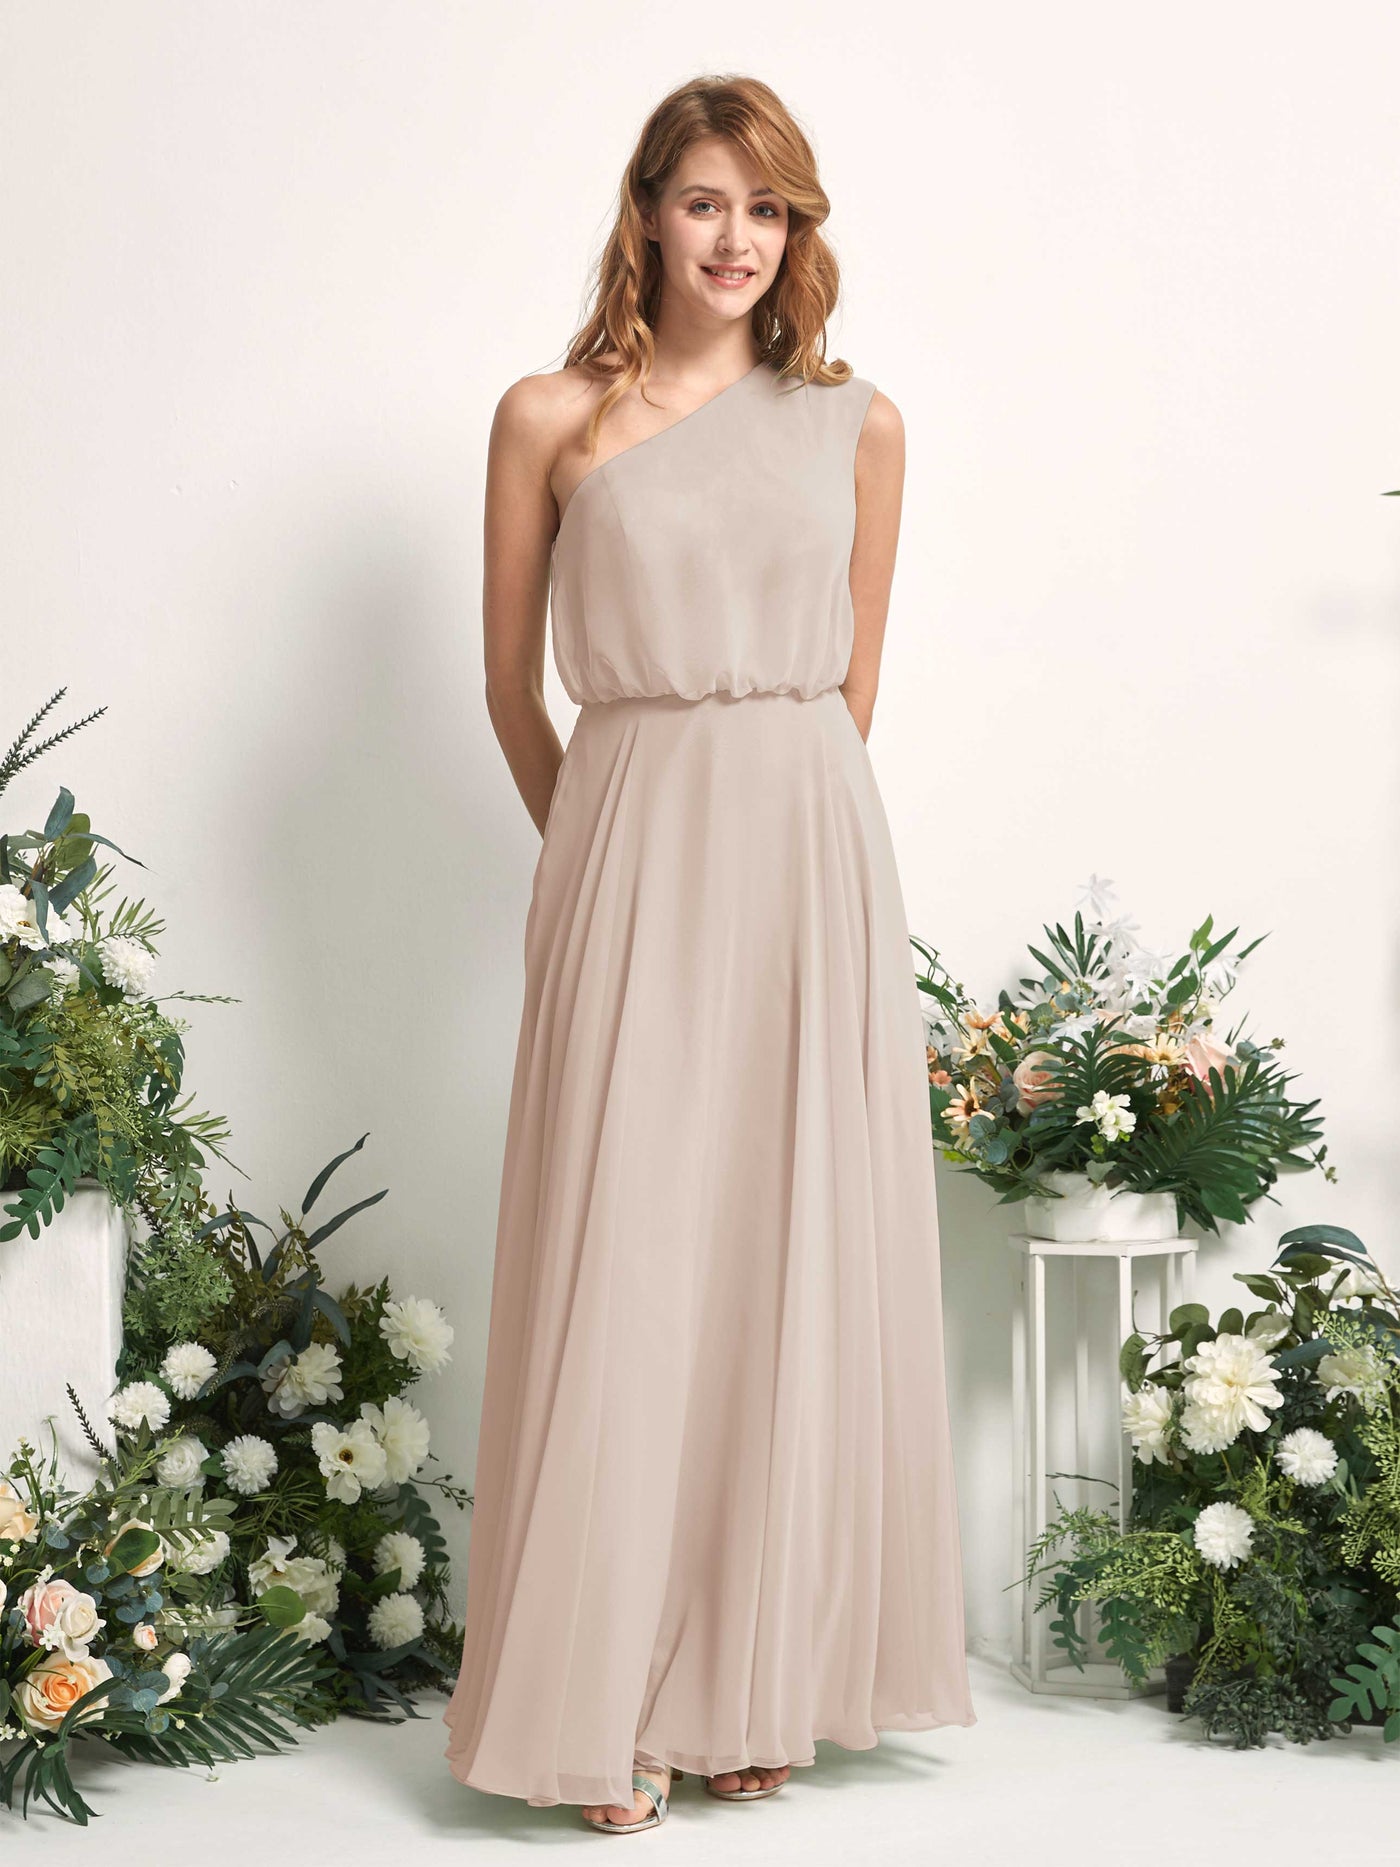 Bridesmaid Dress A-line Chiffon One Shoulder Full Length Sleeveless Wedding Party Dress - Champagne (81226816)#color_champagne